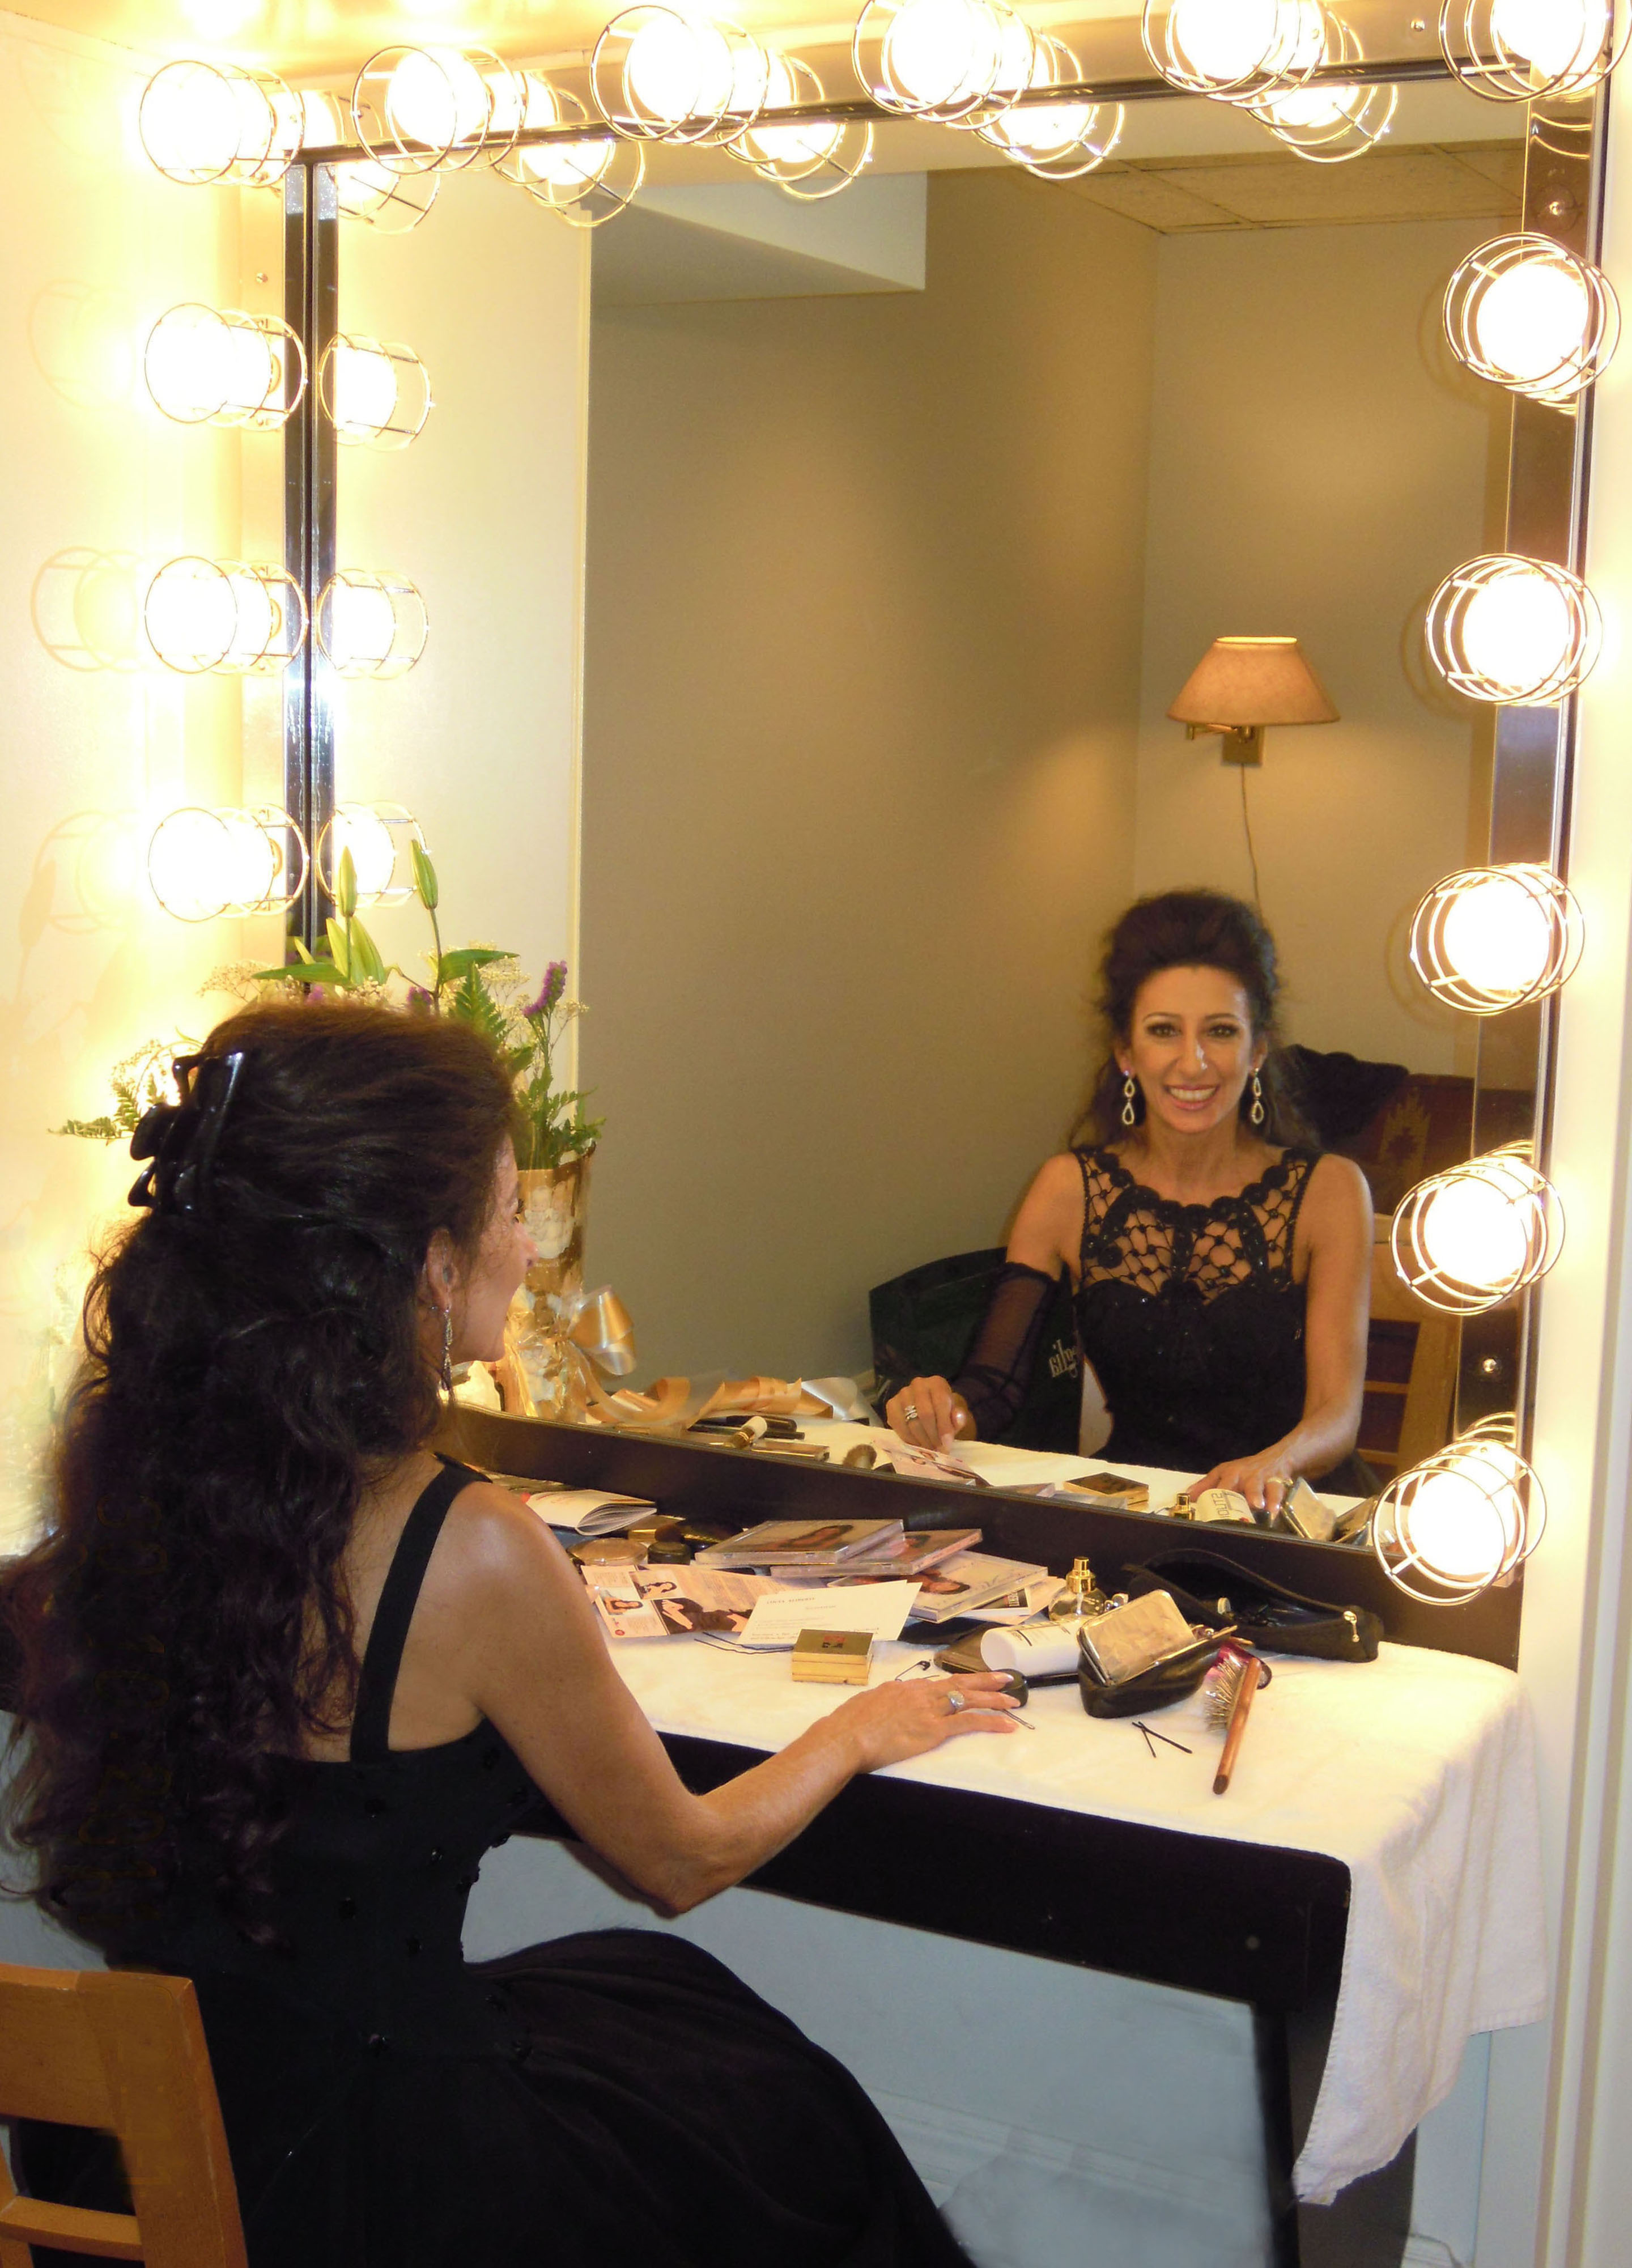 Lucia Aliberti⚘Carnegie Hall⚘New York⚘Concert⚘Dressing Room⚘Makeup Session⚘:http://www.luciaaliberti.it #luciaaliberti #carnegiehall #newyork #concert #dressingroom #makeupsession